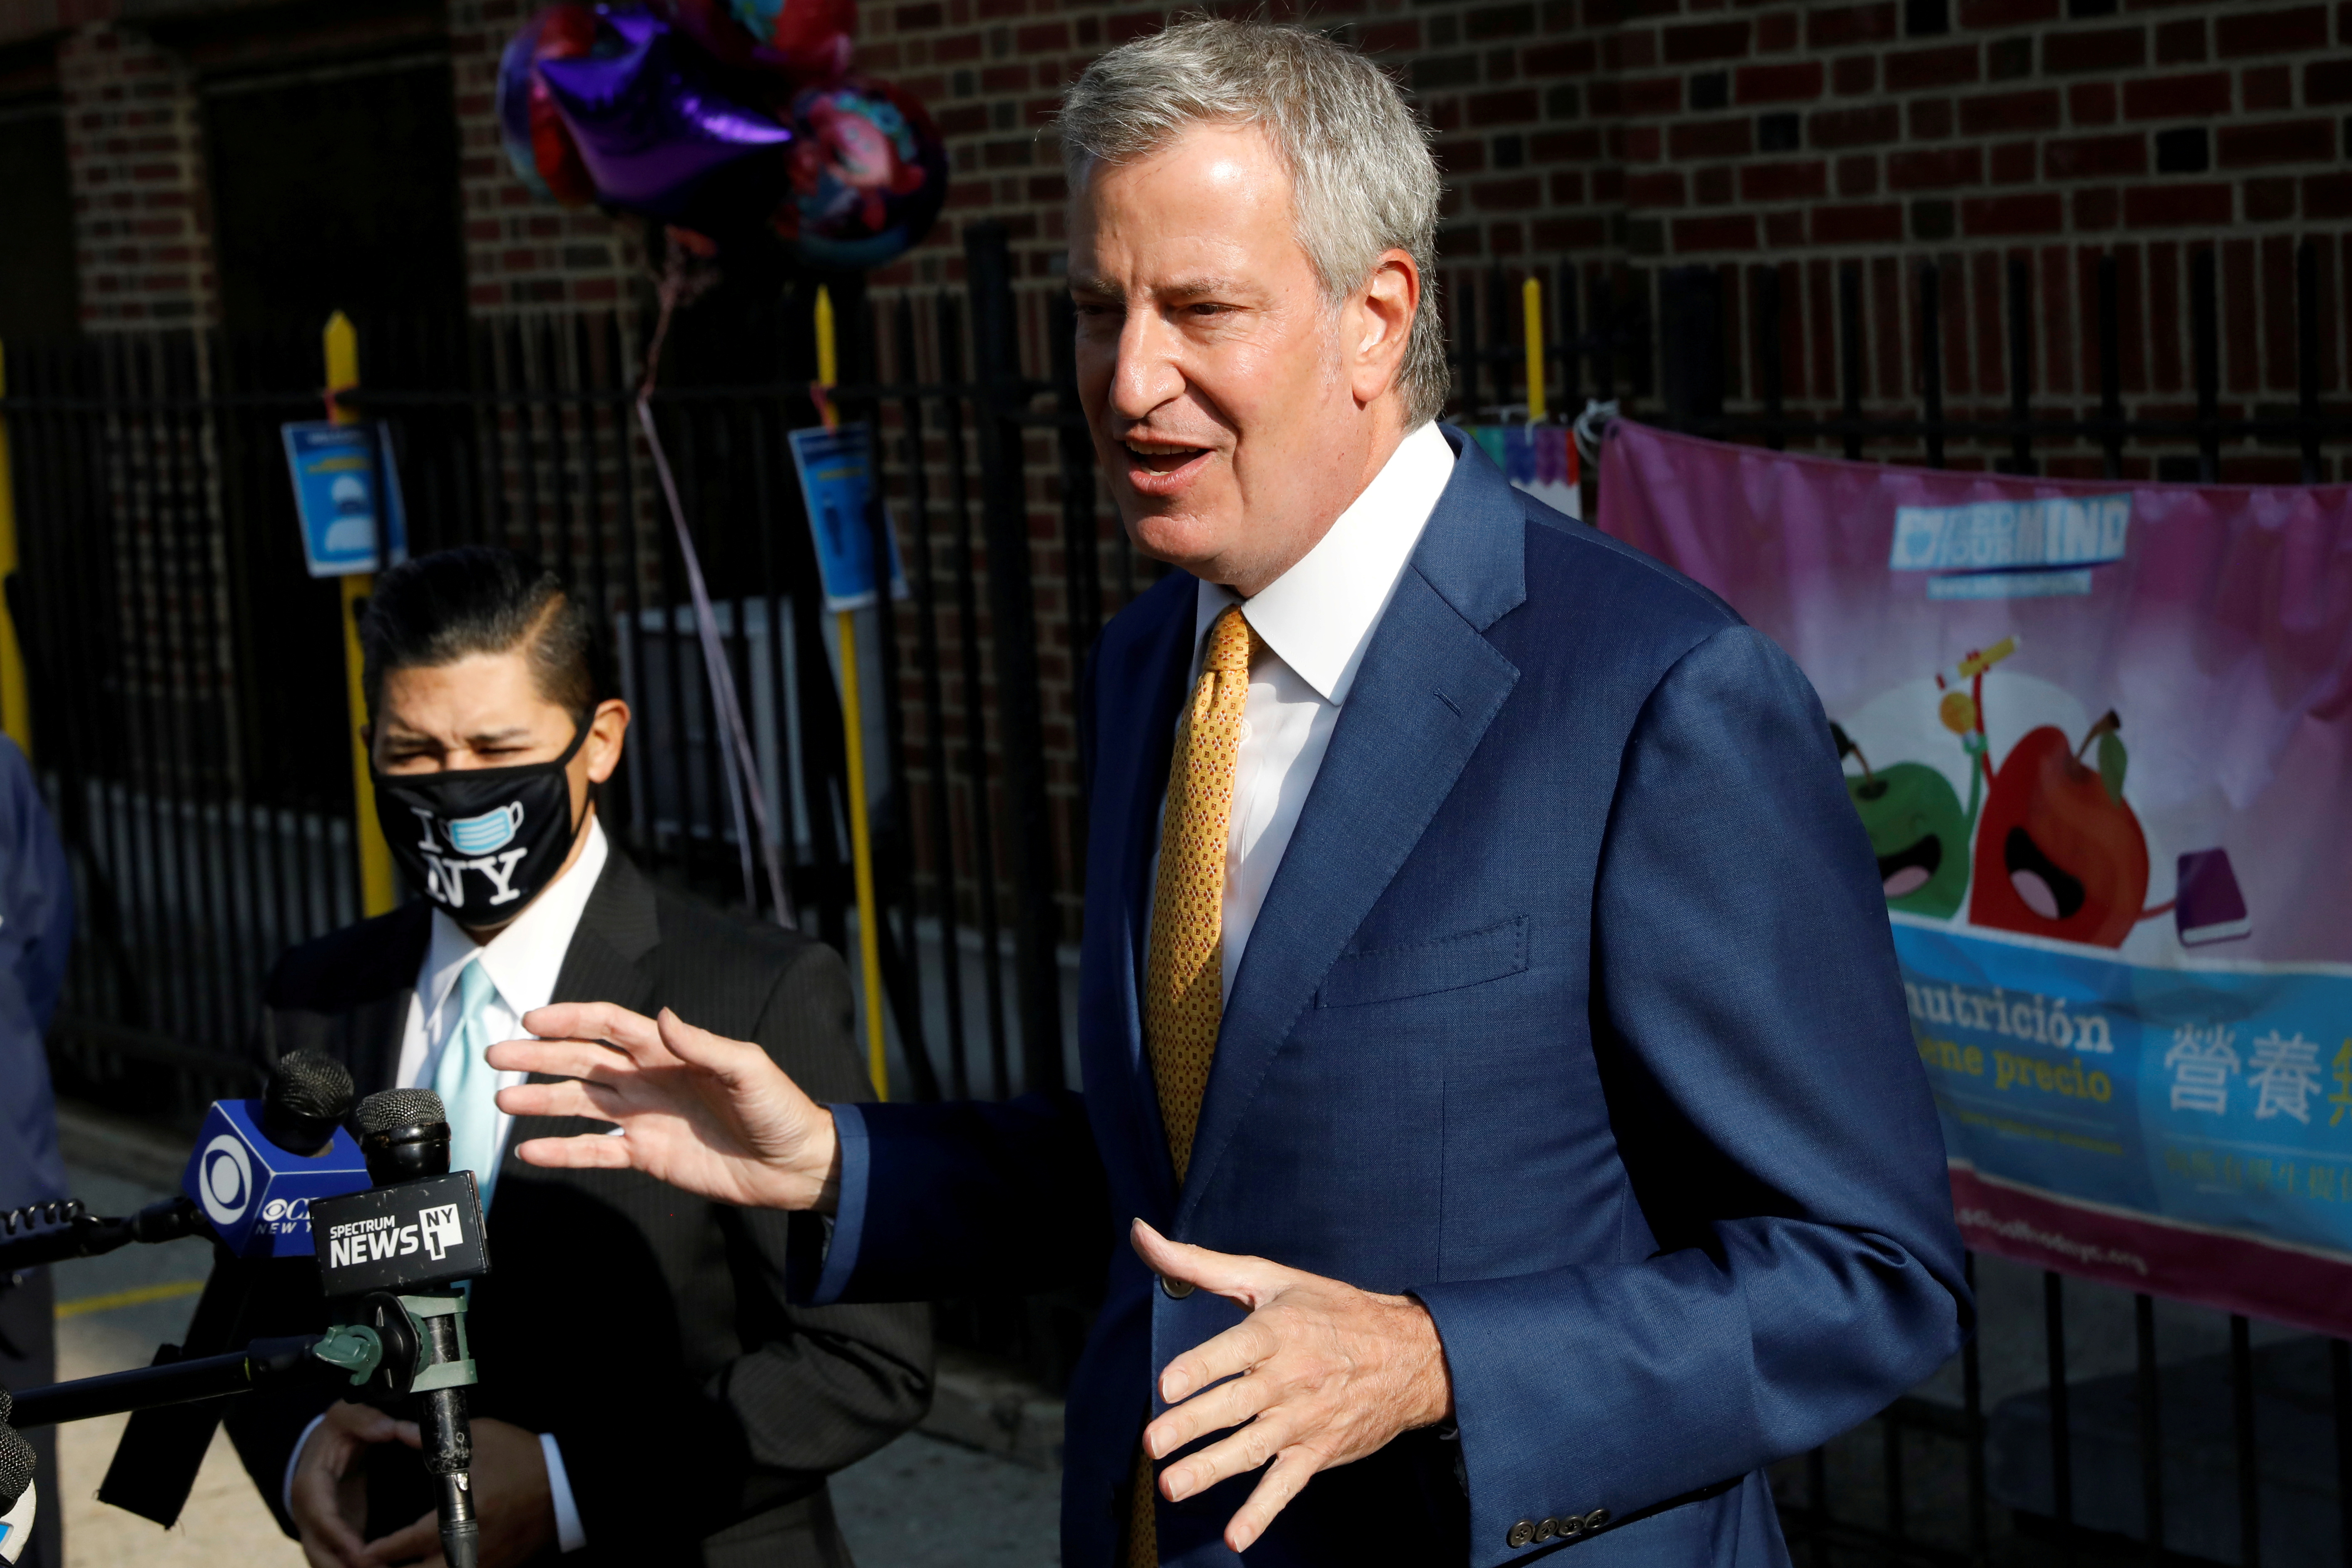 New York City Mayor Bill de Blasio, speaks during a news conference after greeting students for the first day of in-person pre-school following the outbreak of the coronavirus disease (COVID-19) in New York